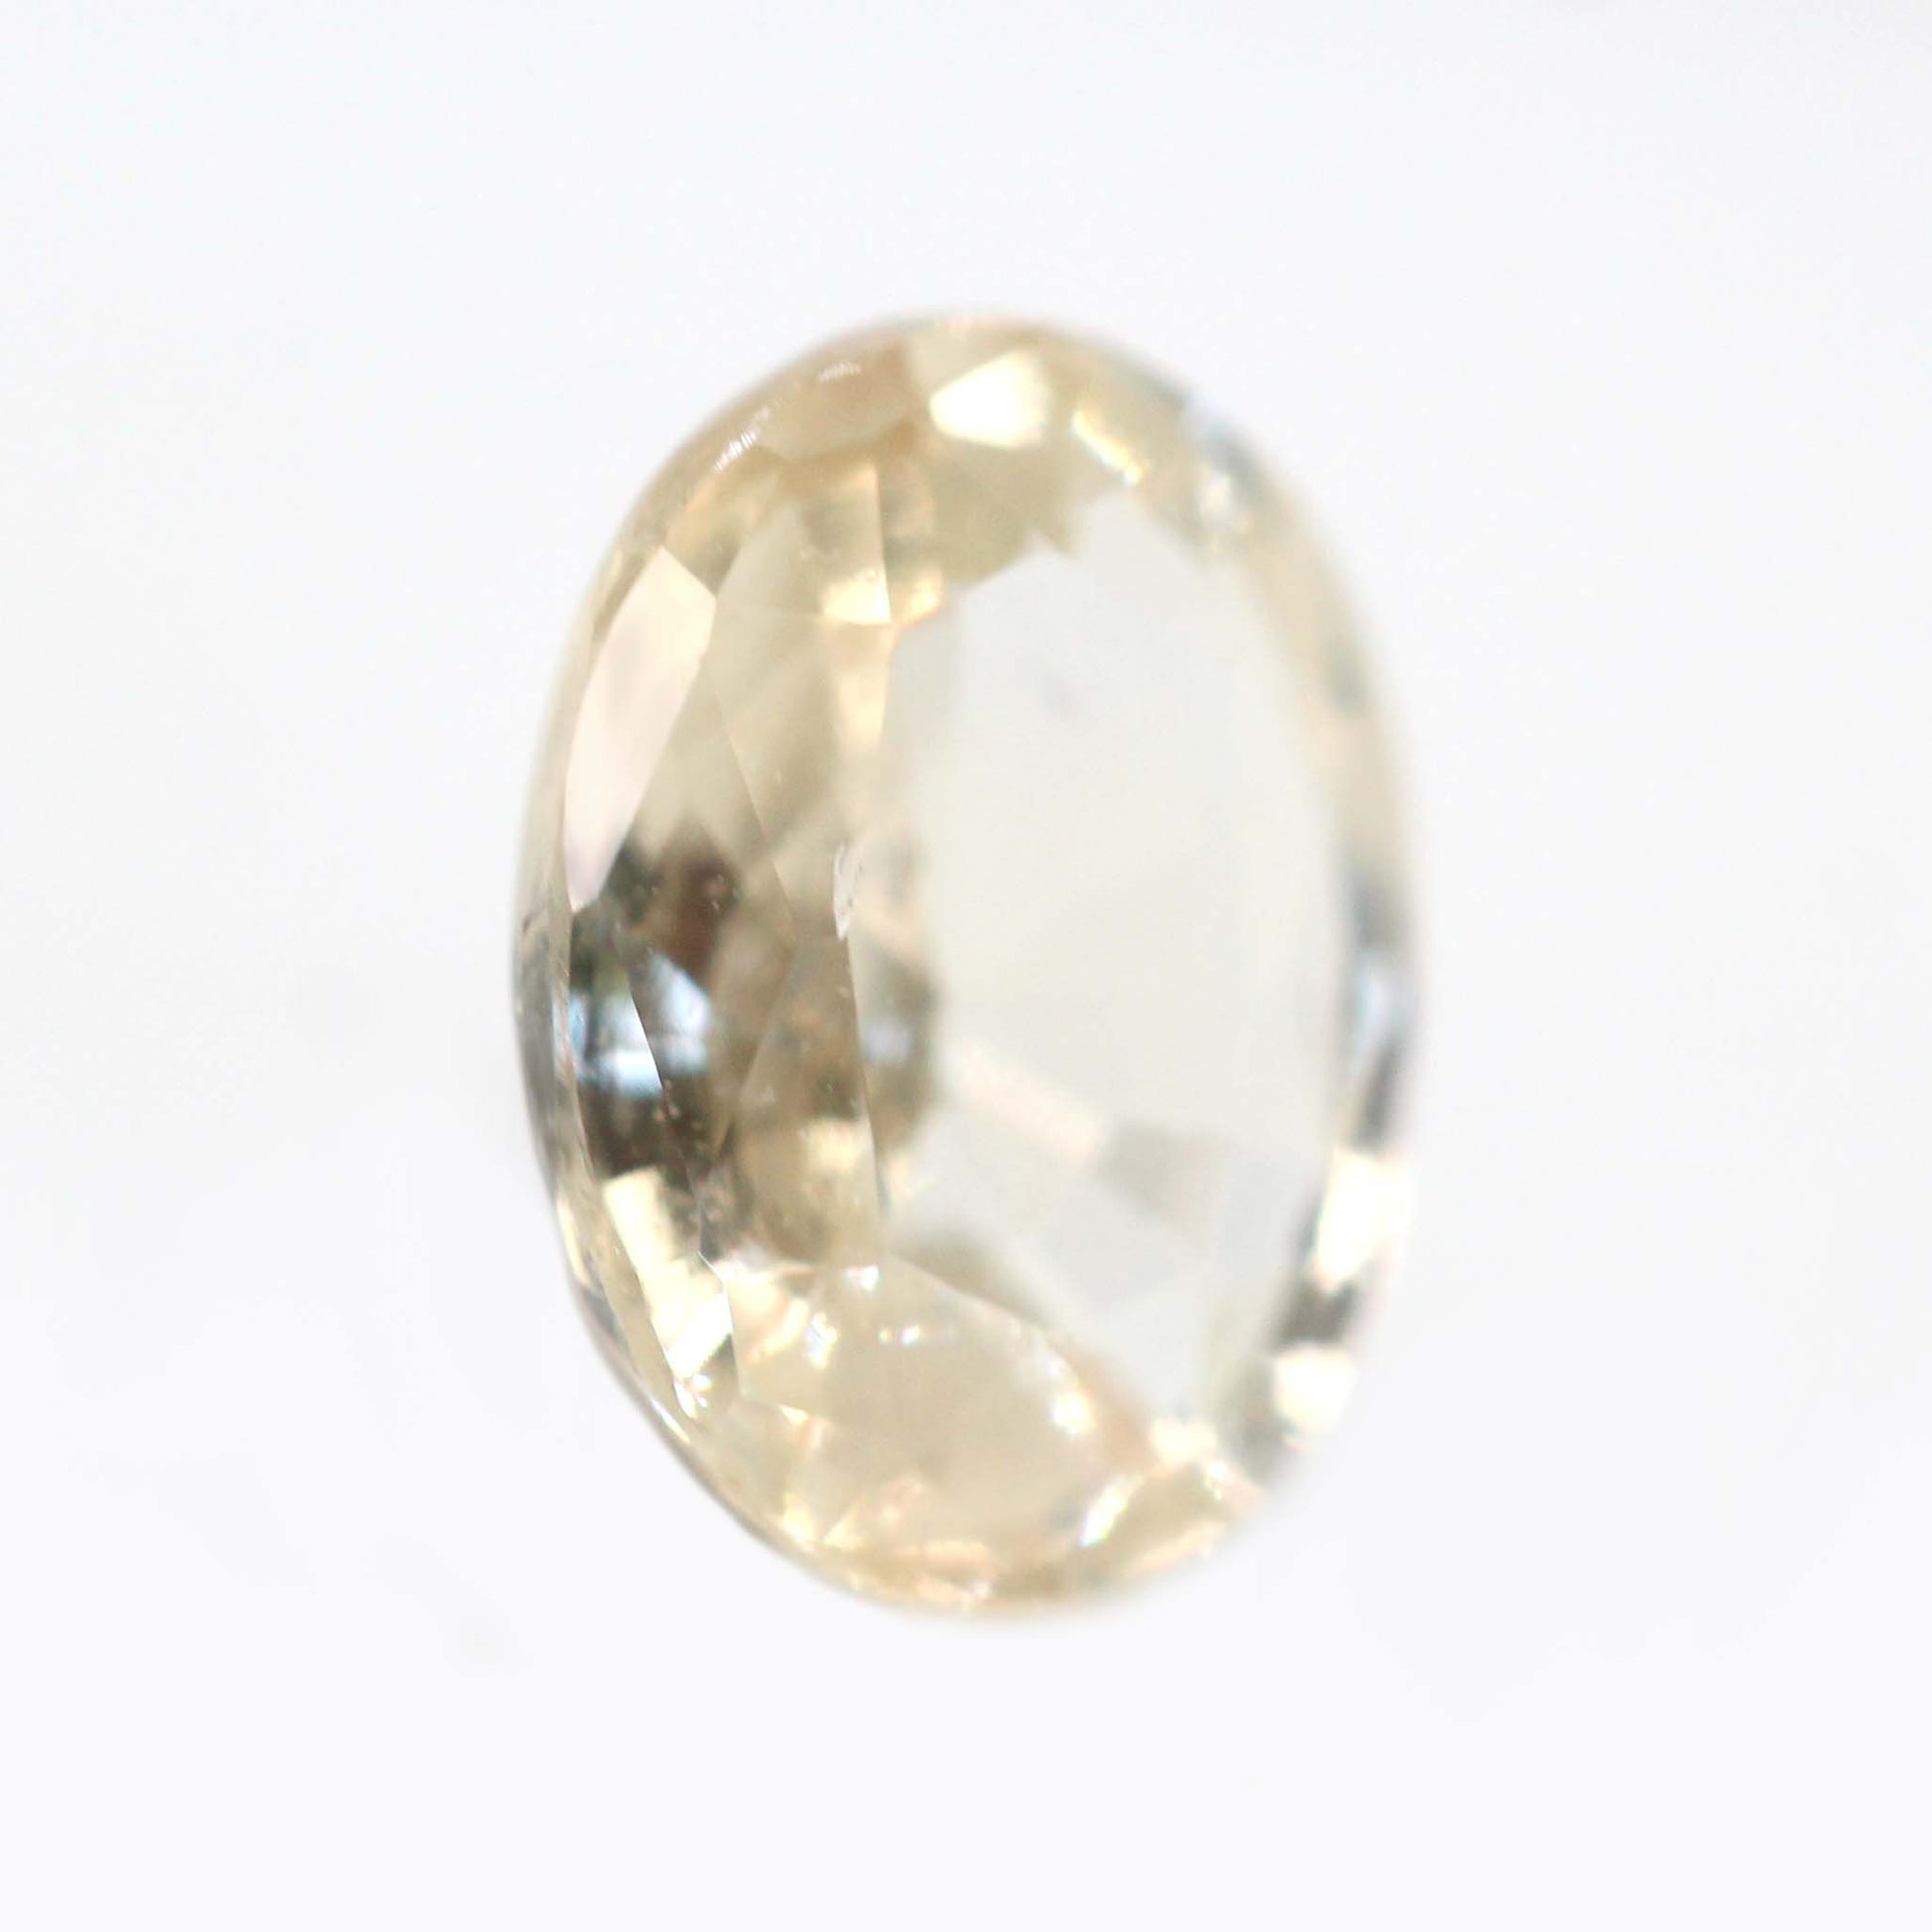 1.62 Carat Clear Golden Oval Sapphire for Custom Work - Inventory Code COSAP162 - Midwinter Co. Alternative Bridal Rings and Modern Fine Jewelry